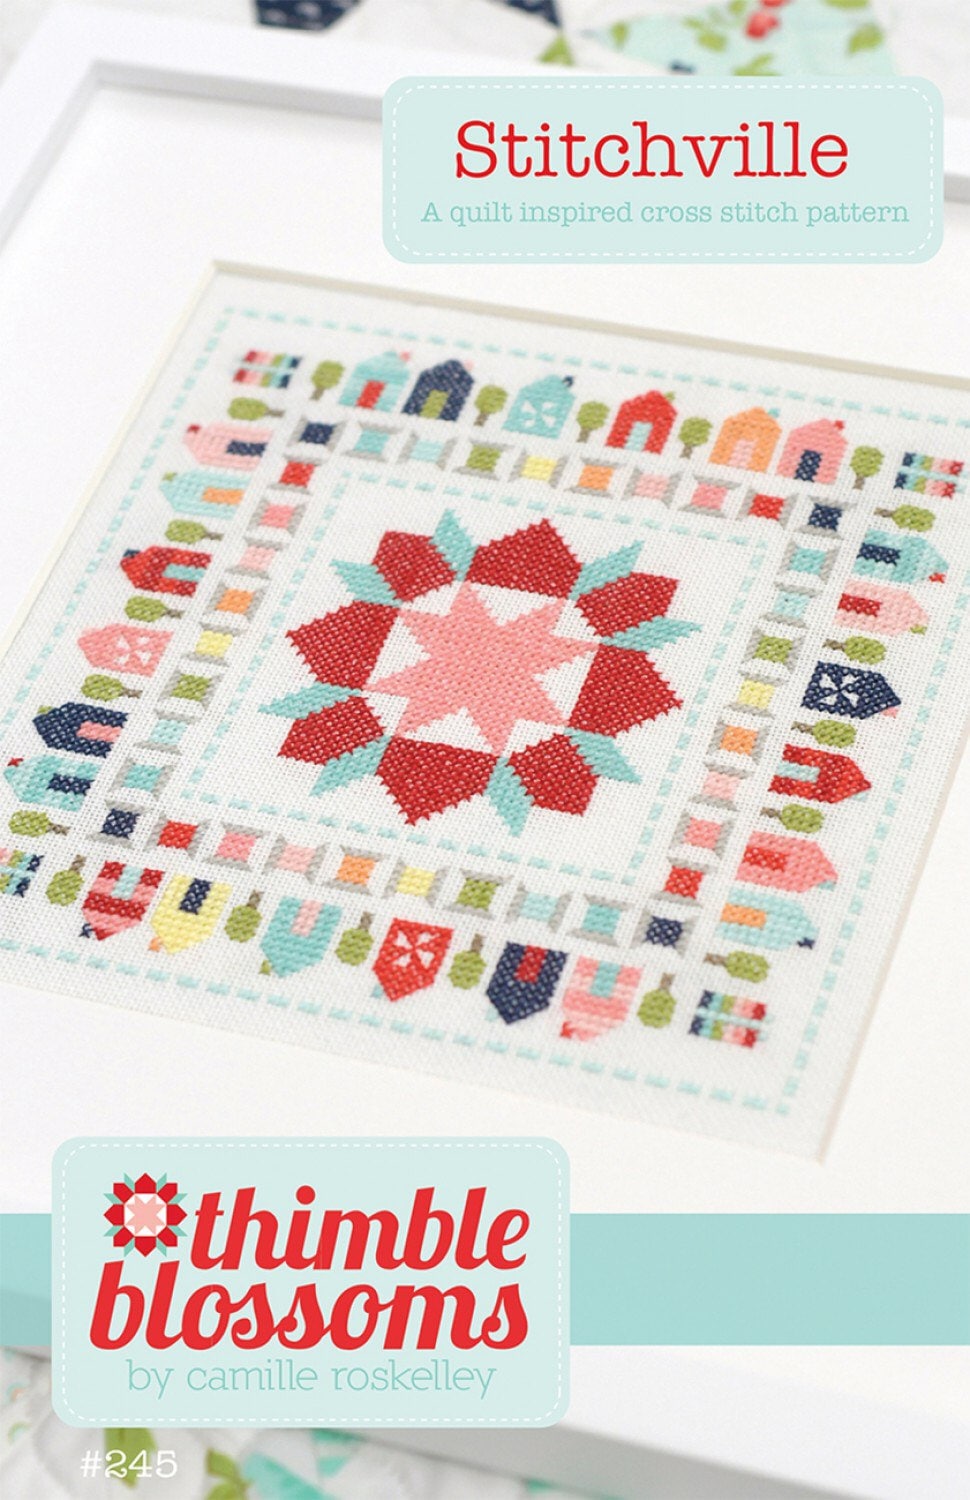 Stitchville Cross Stitch Pattern - Thimble Blossoms - Camille Roskelley - 87x87